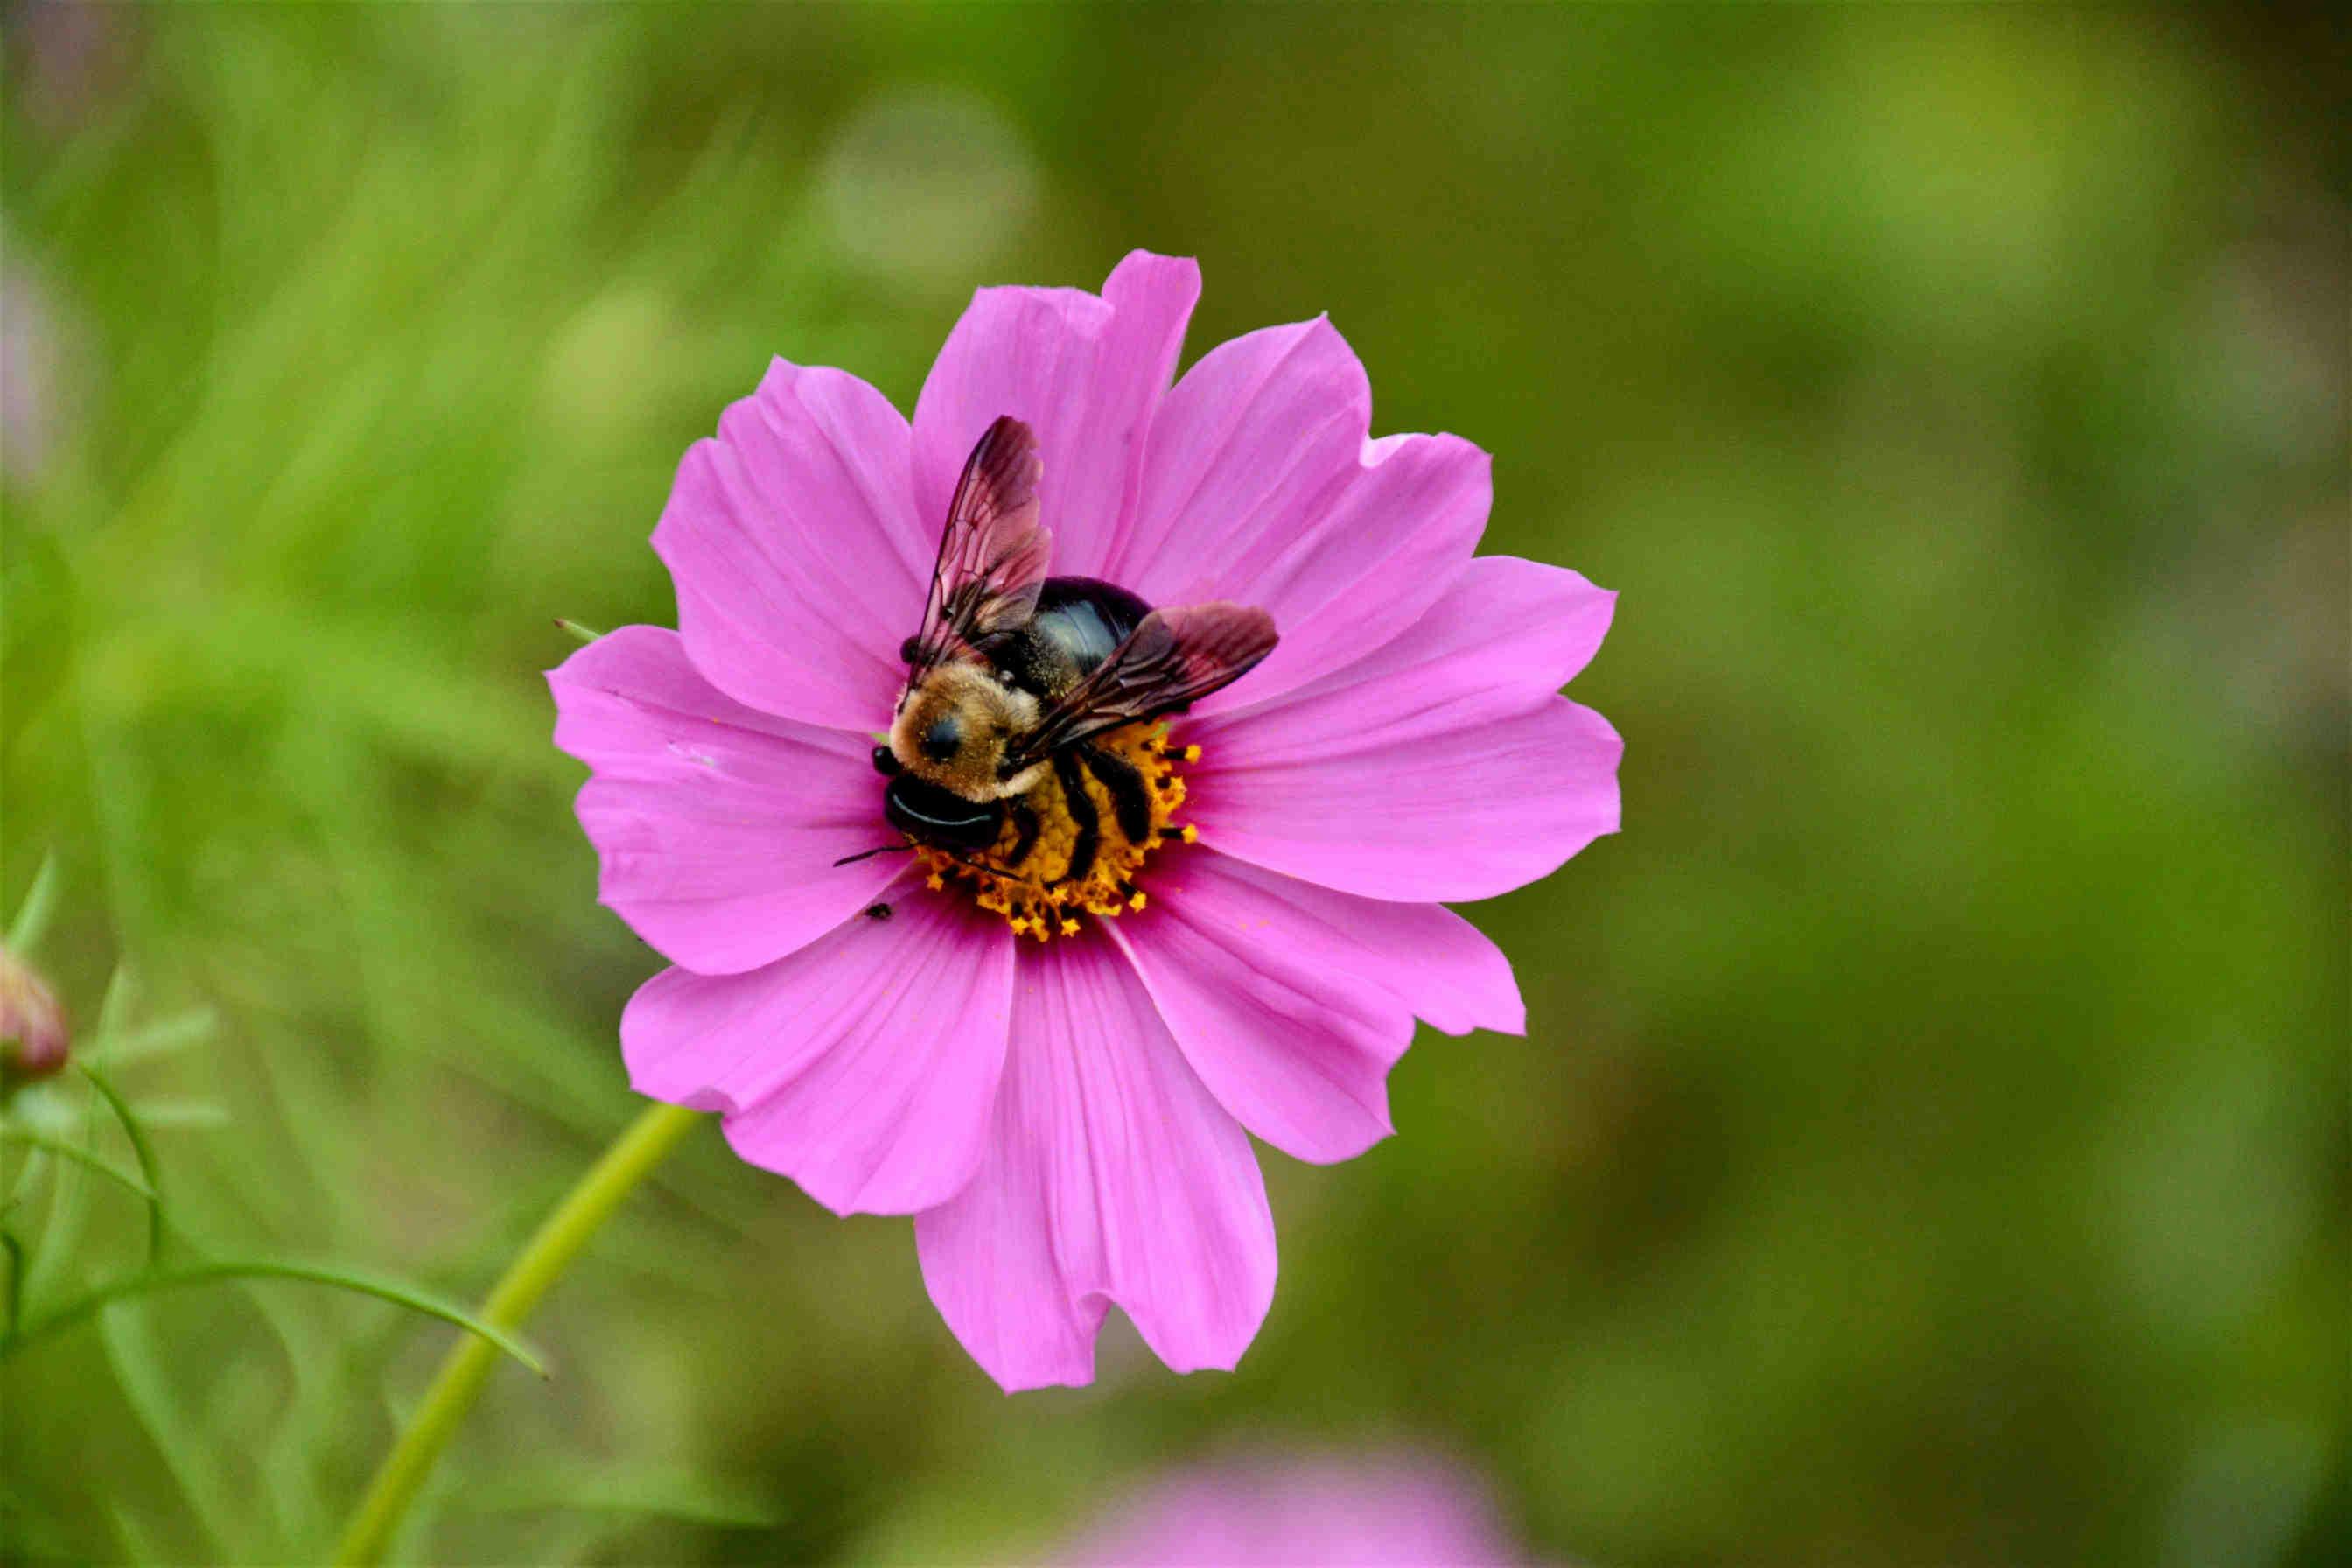 Flowers have adapted to the visual system of bees